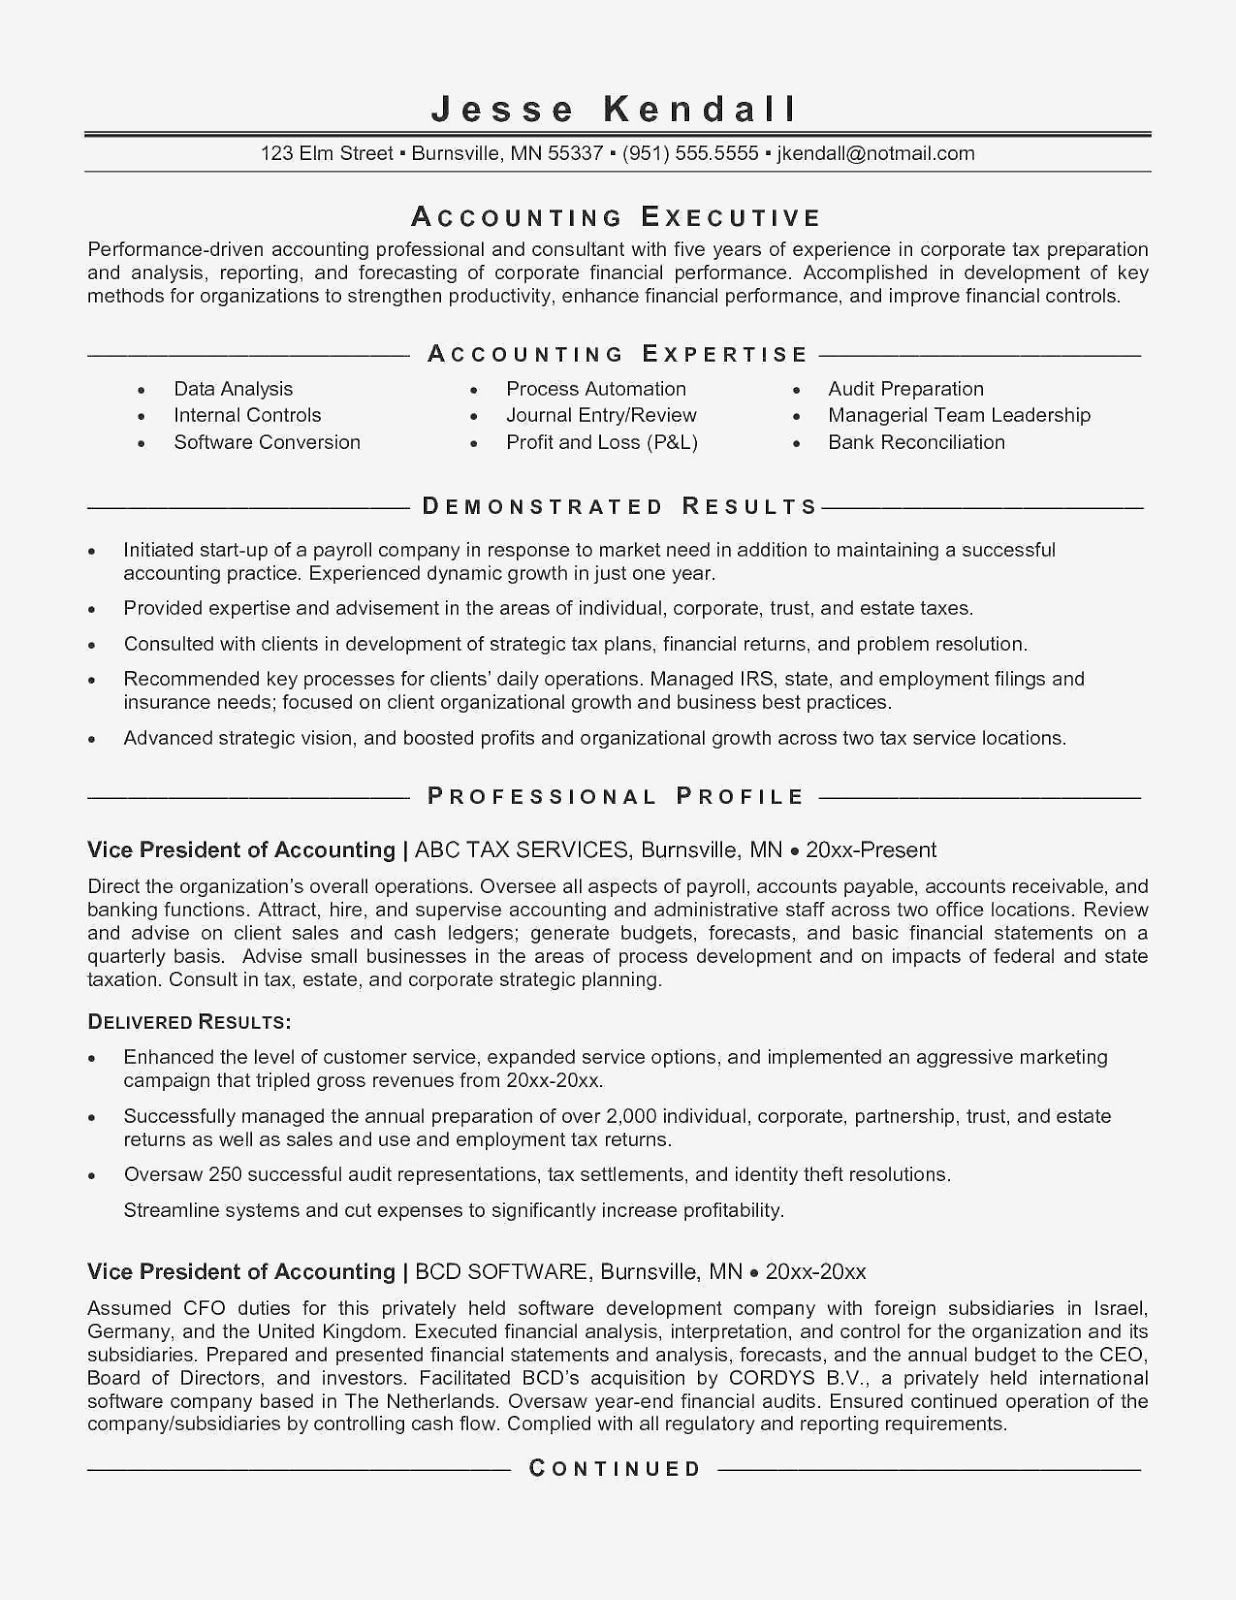 Sample Resume for Accounting Clerk with No Experience Account Clerk Resume Sample 2019 Resume Examples 2020